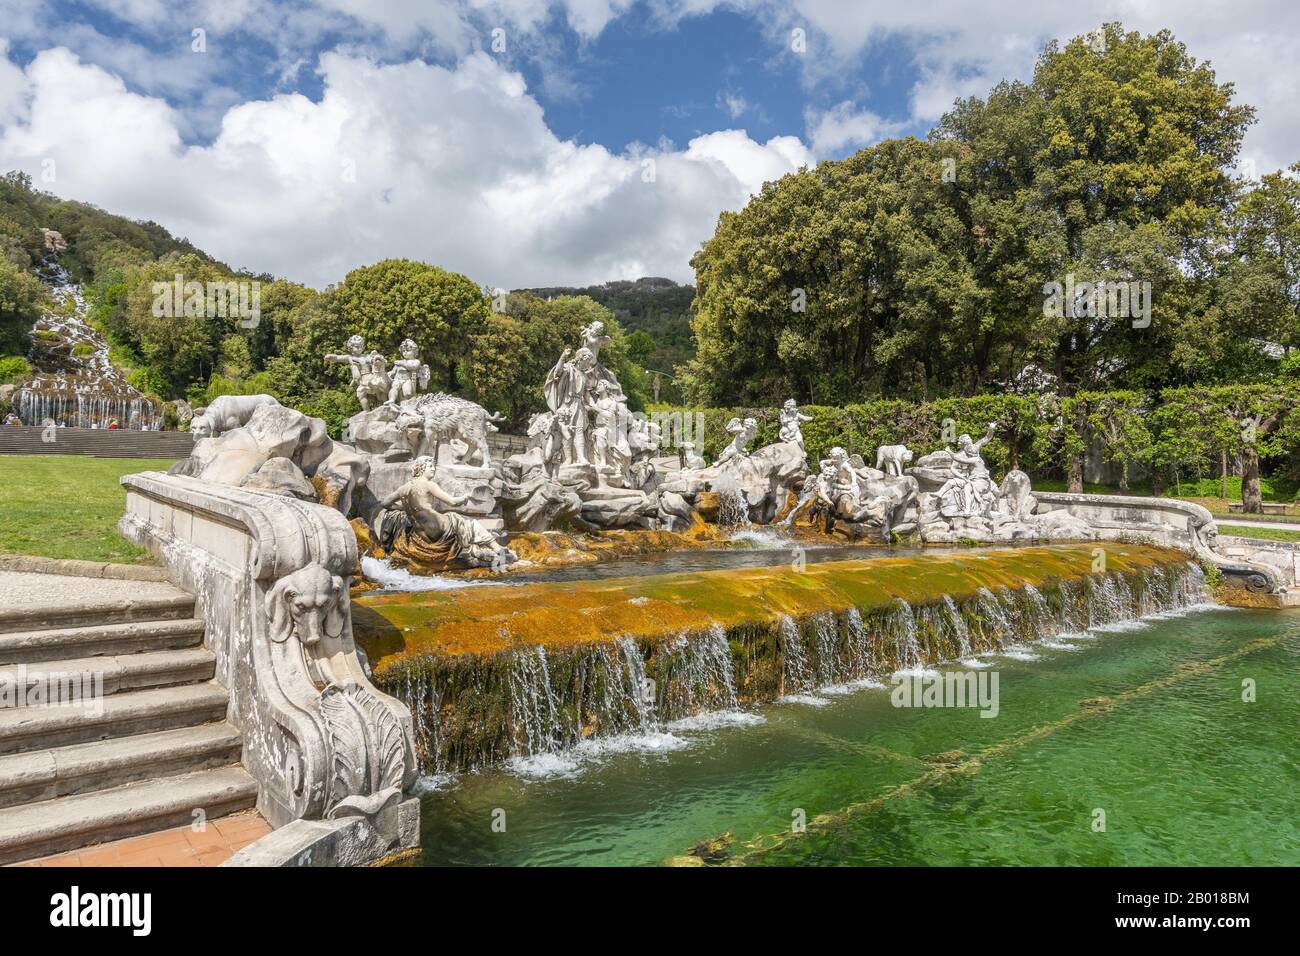 Artificial waterfall in the garden of the Royal Palace of Caserta (Caserta Royal Palace), Italy. Stock Photo